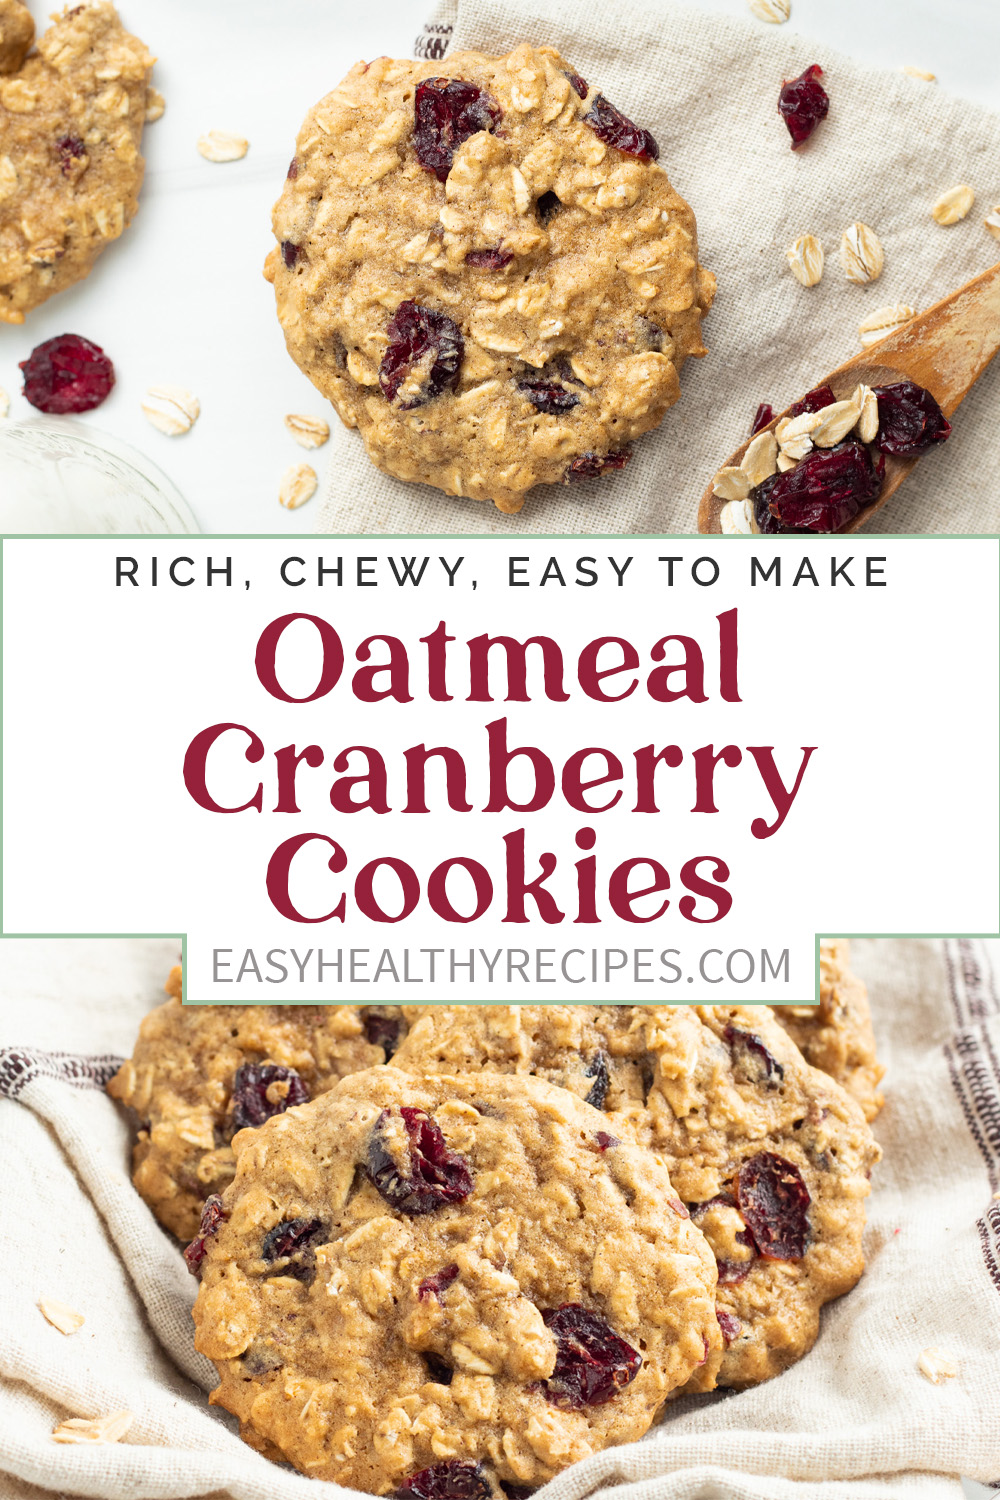 Pin graphic for oatmeal cranberry cookies.